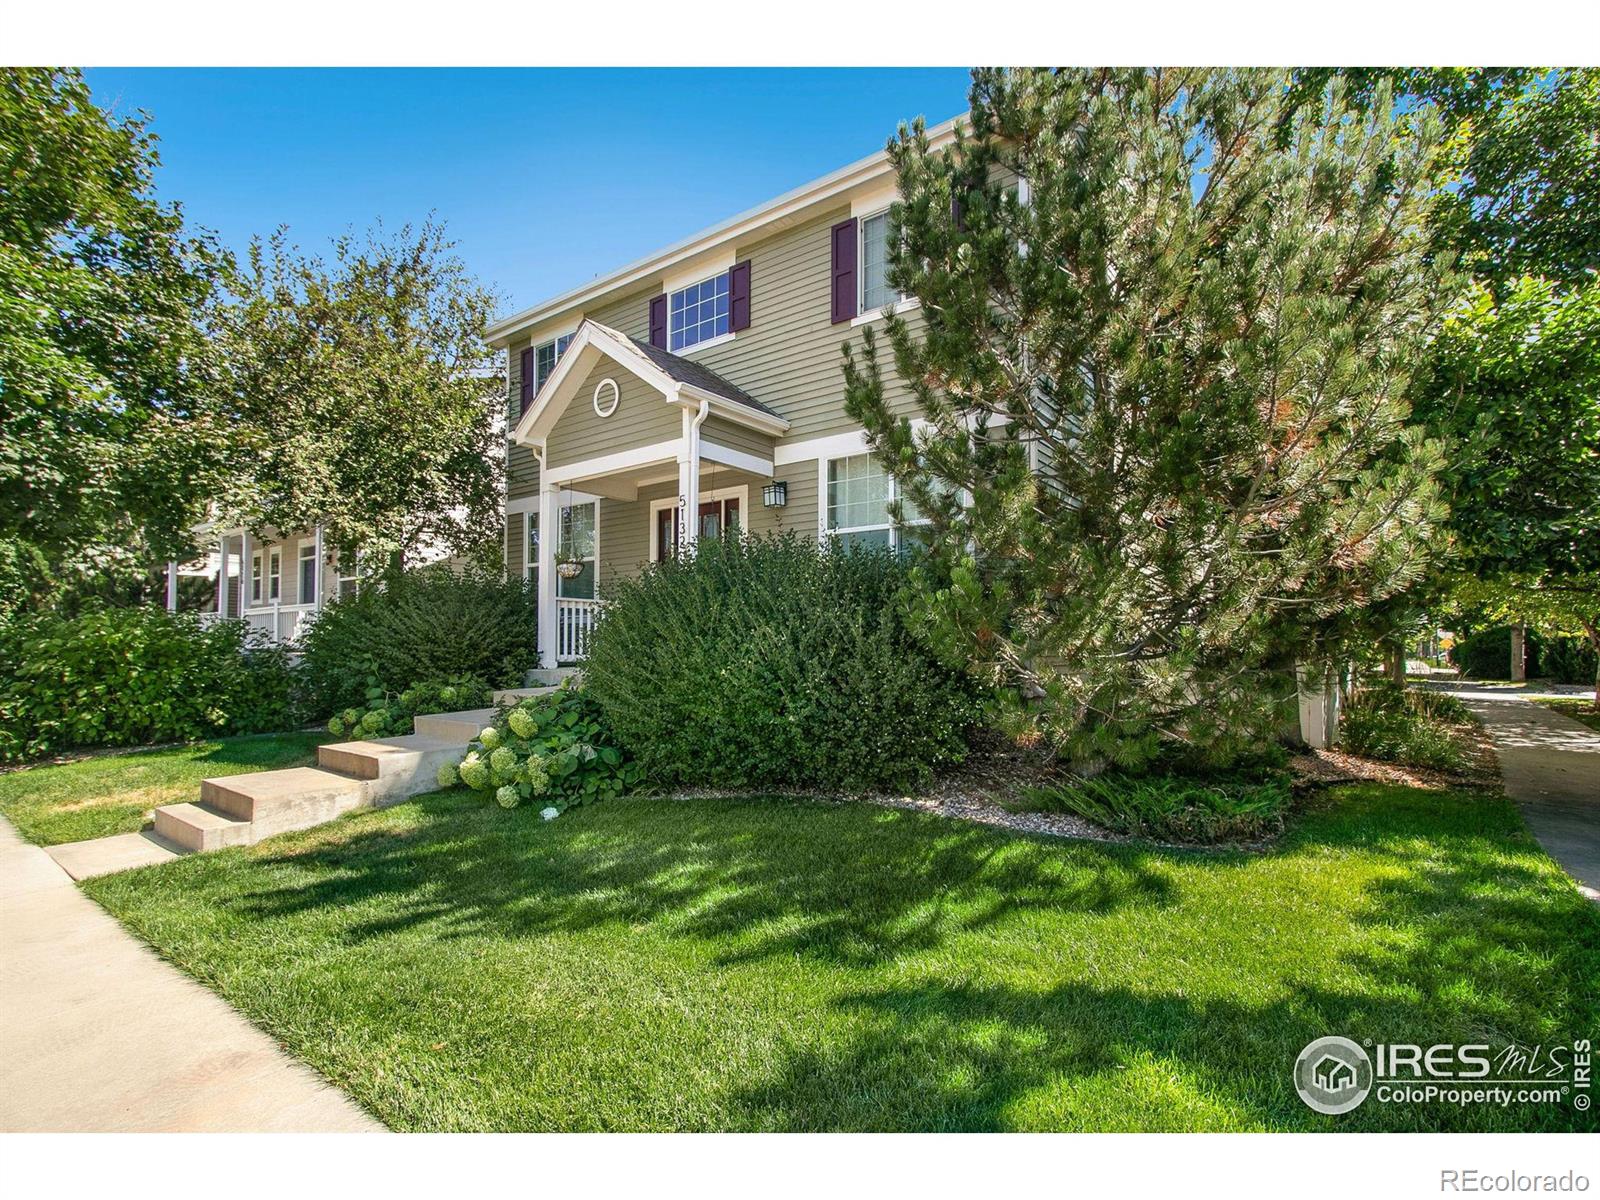 5132  cinquefoil lane, Fort Collins sold home. Closed on 2024-01-05 for $655,000.